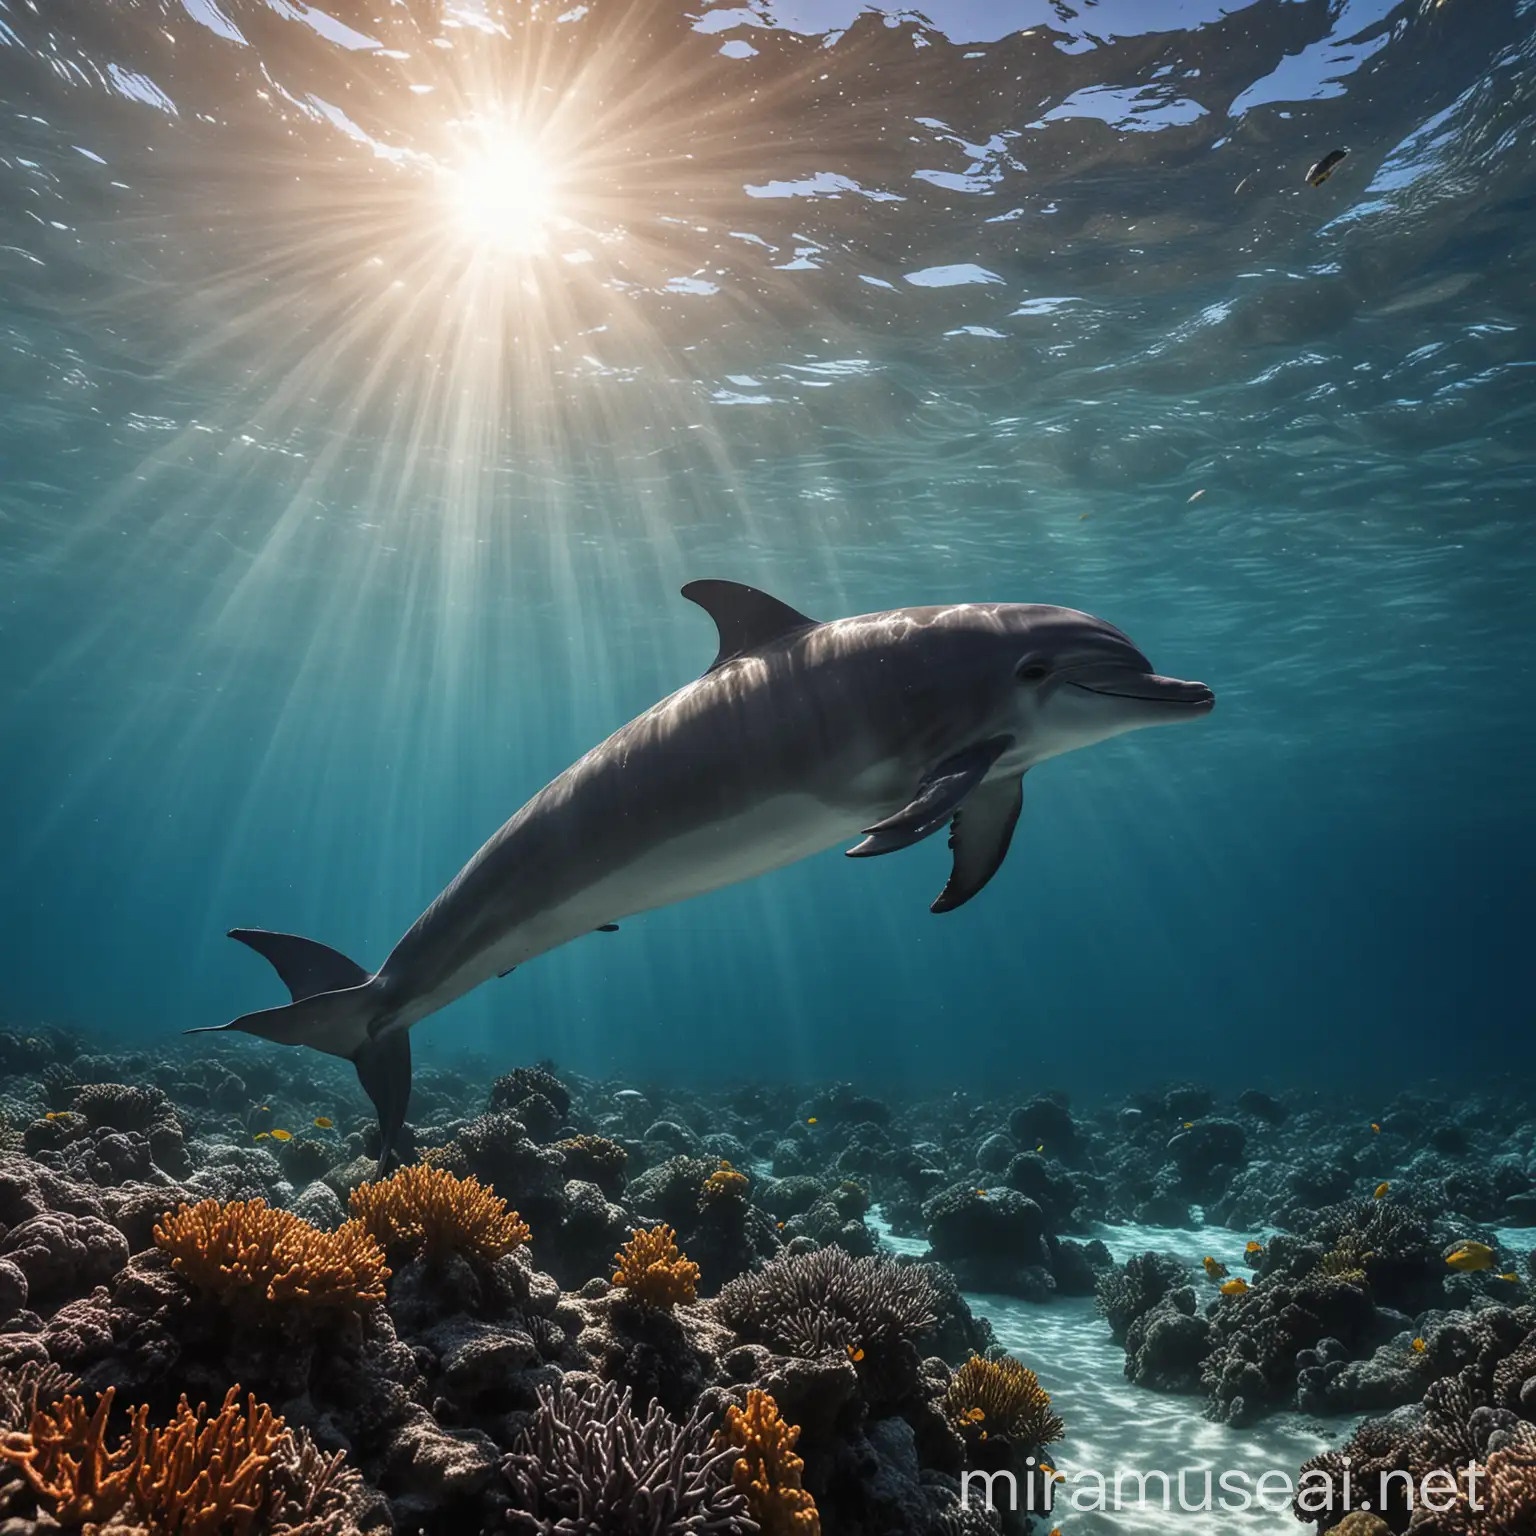 A dolphin is swimming gracefully underwater in a clear, vibrant blue ocean. The sunlight filters down from the surface, creating a beautiful play of light and shadows on the dolphin's sleek, grey body. Around the dolphin, colorful coral reefs and schools of small, bright fish add to the lively underwater scene. The water is clear, allowing the details of the coral and sea plants swaying gently in the current to be seen. The scene captures the tranquility and beauty of the underwater world.